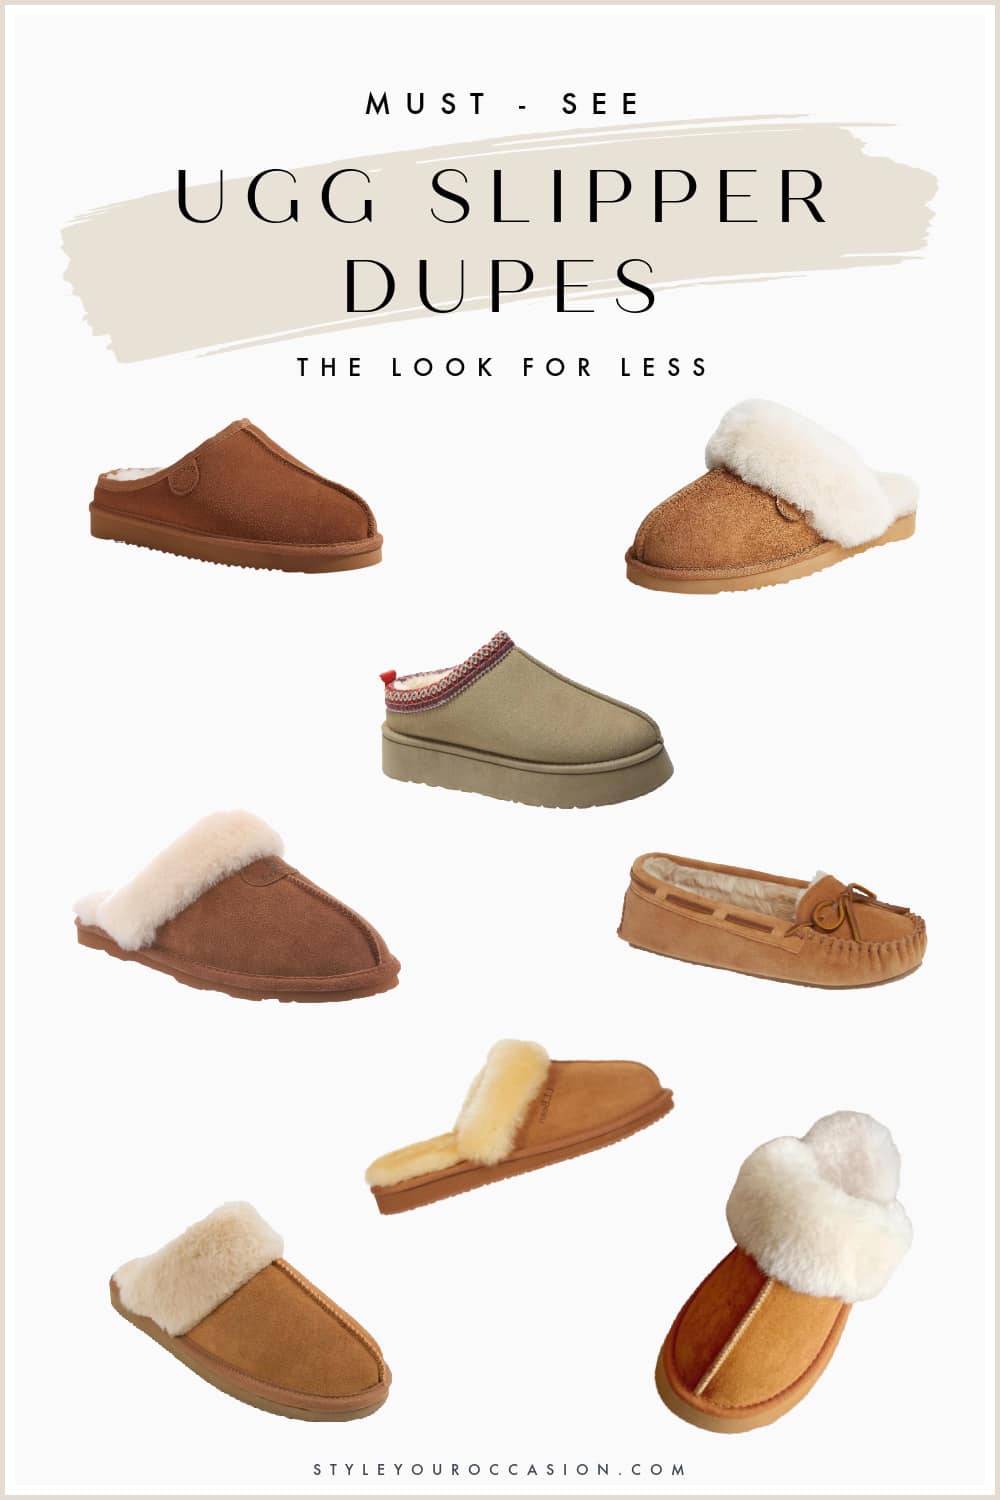 An image board of Ugg slipper dupes and look-alikes